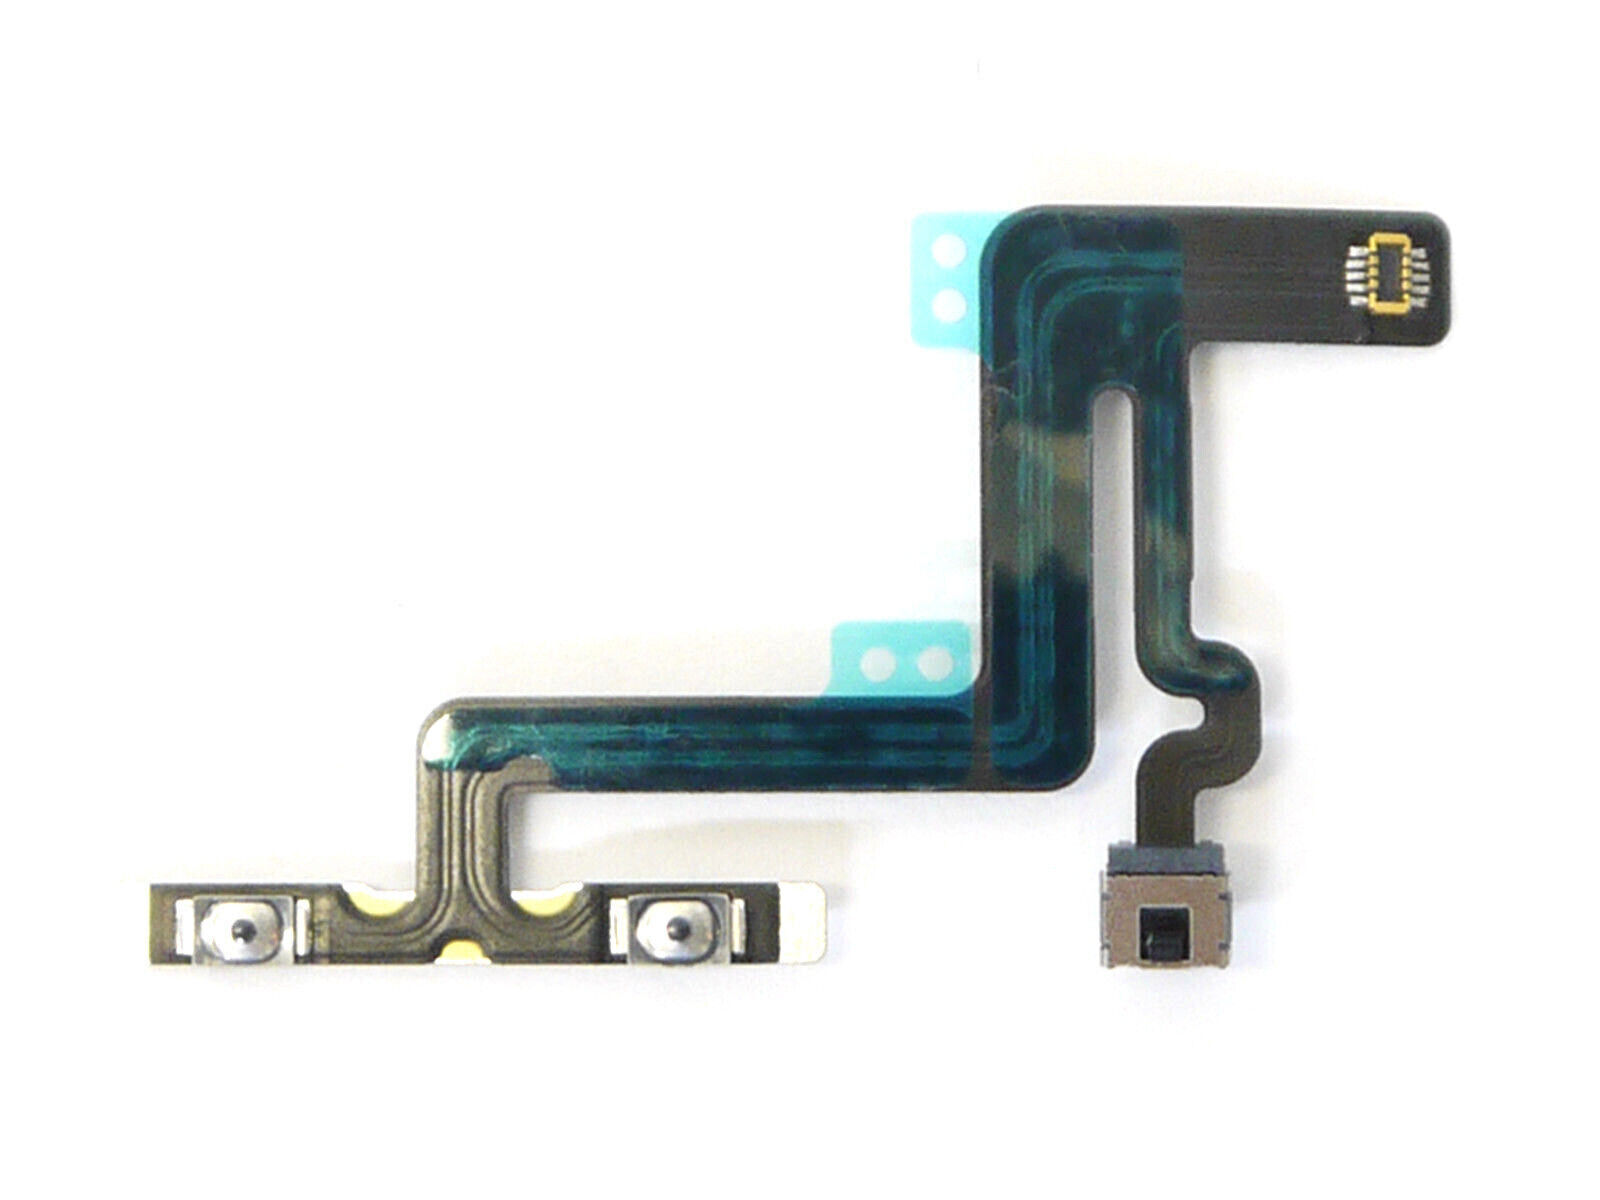 NEW Mute Switch Volume Key Flex Cable 821-2210-04 for Apple iPhone 6 Plus 5.5\